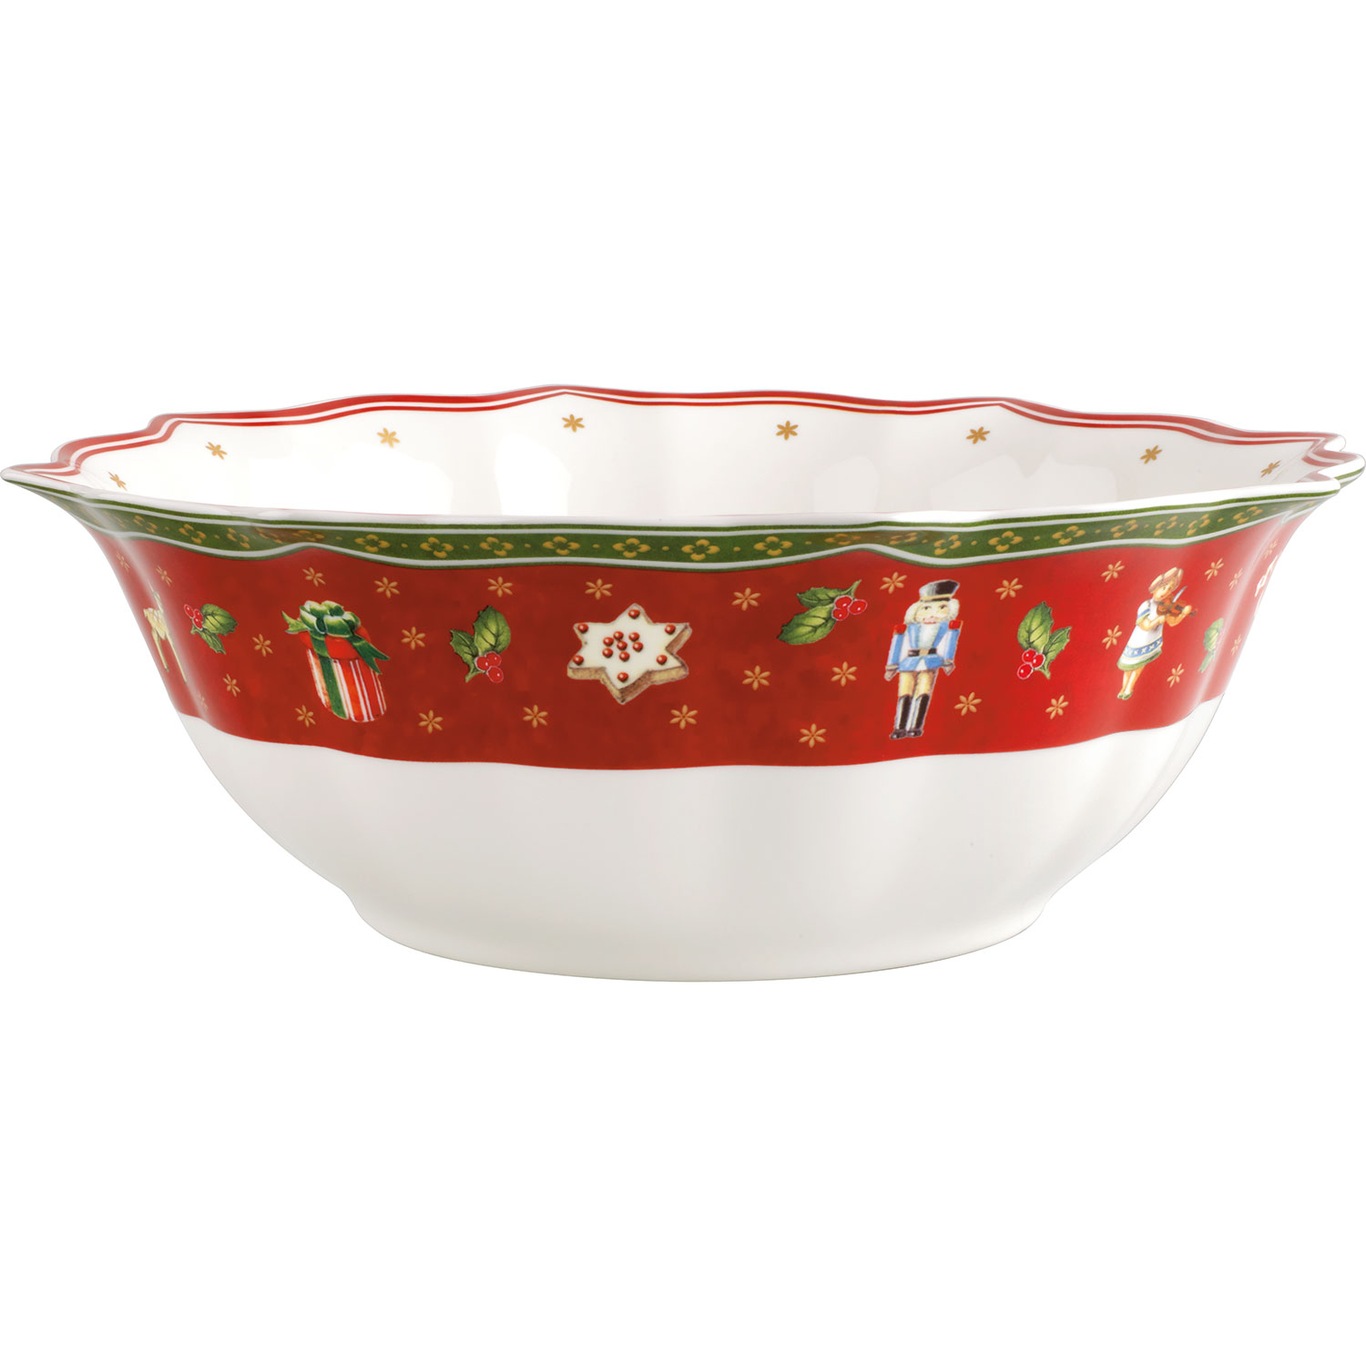 Toy's Delight Salad Bowl